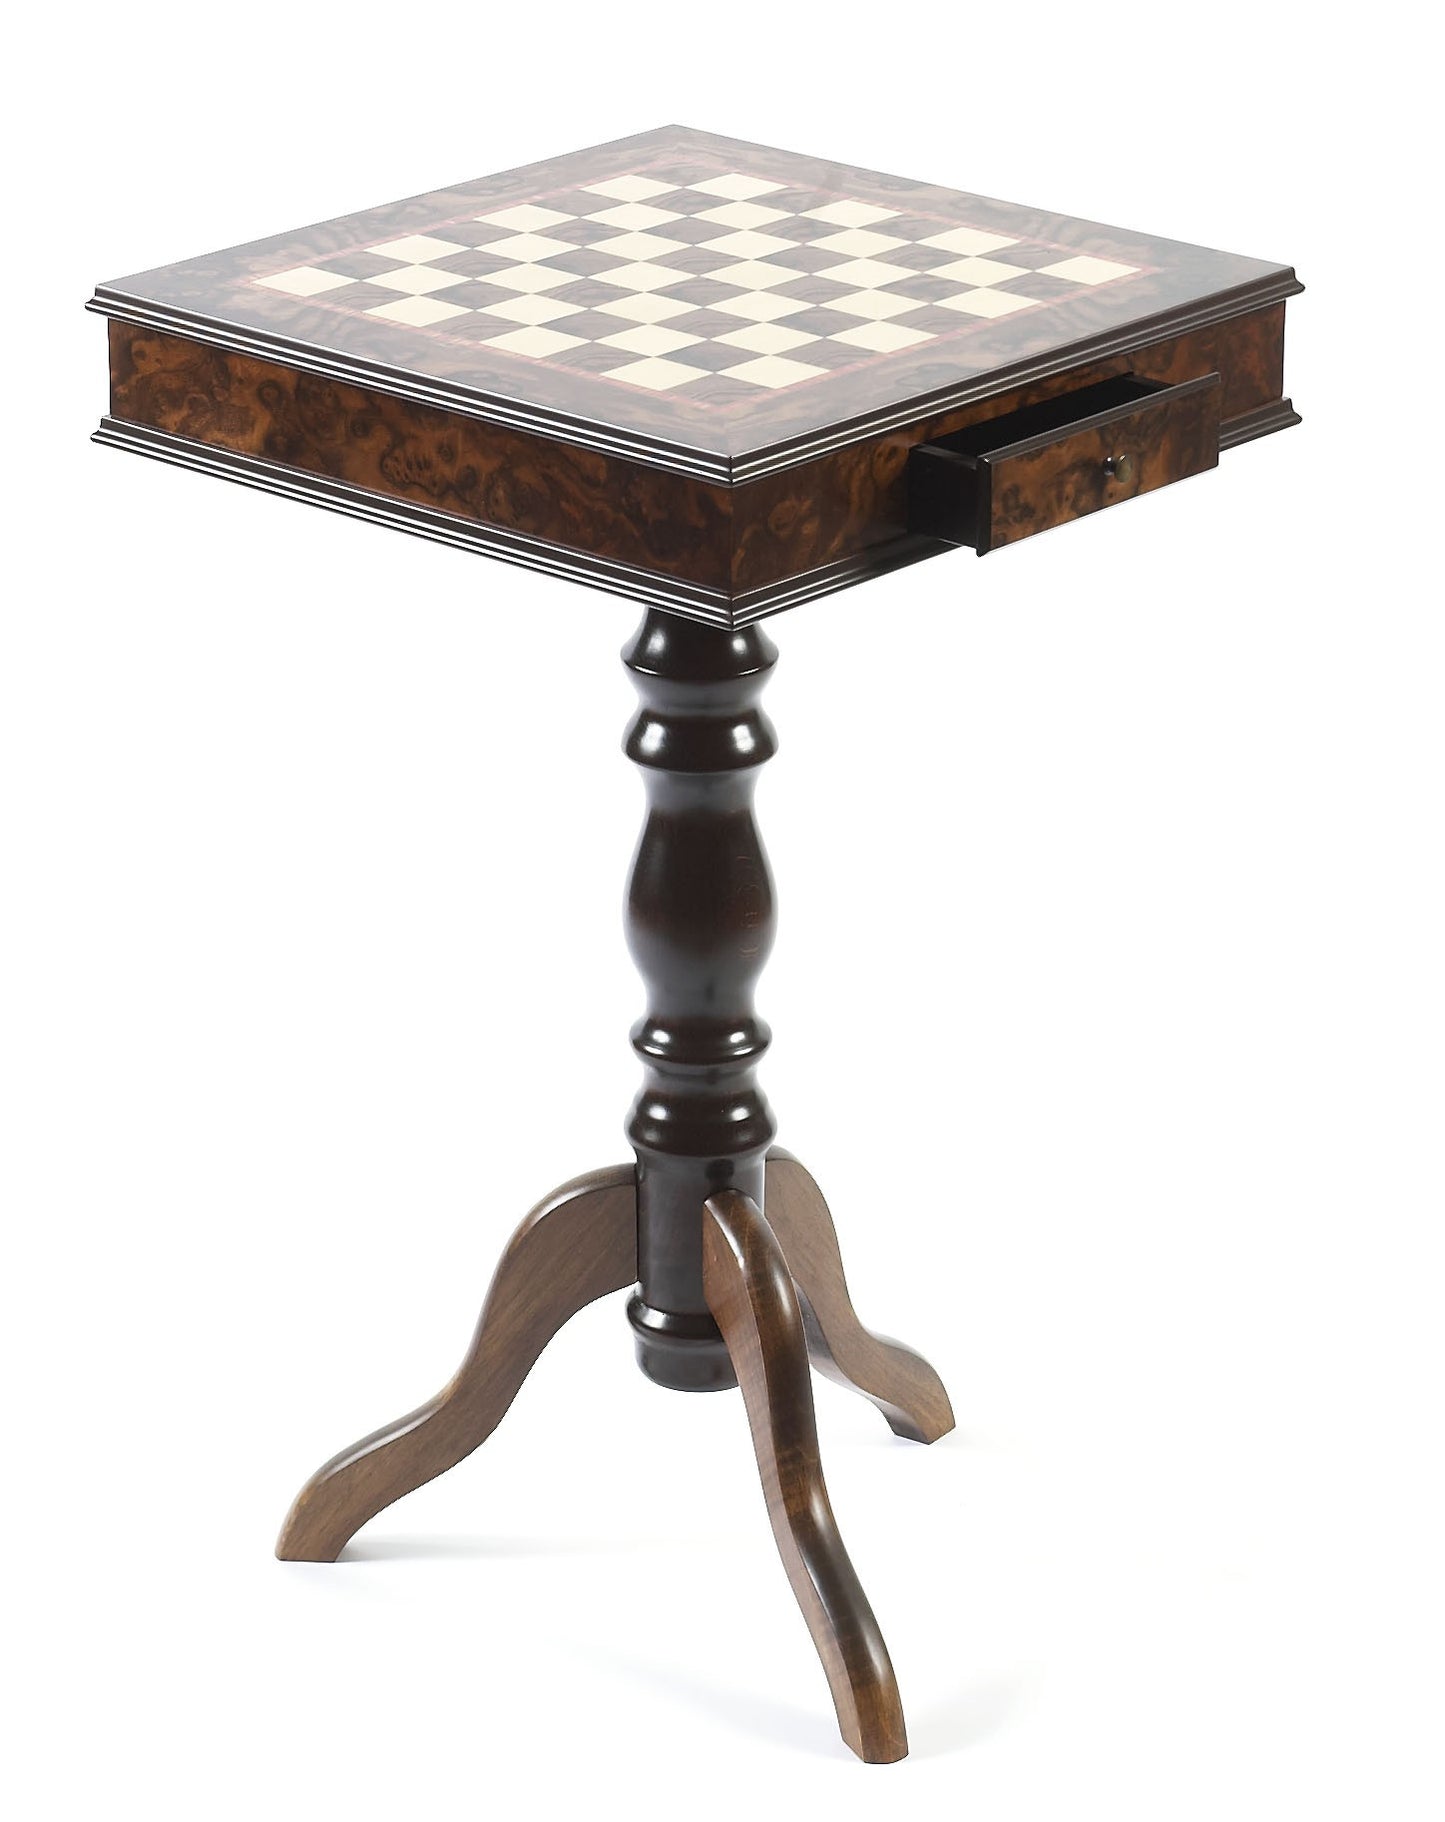 The Roma 16 inch Chess Table from Italy (1 7/16 Inch Squares) open drawer